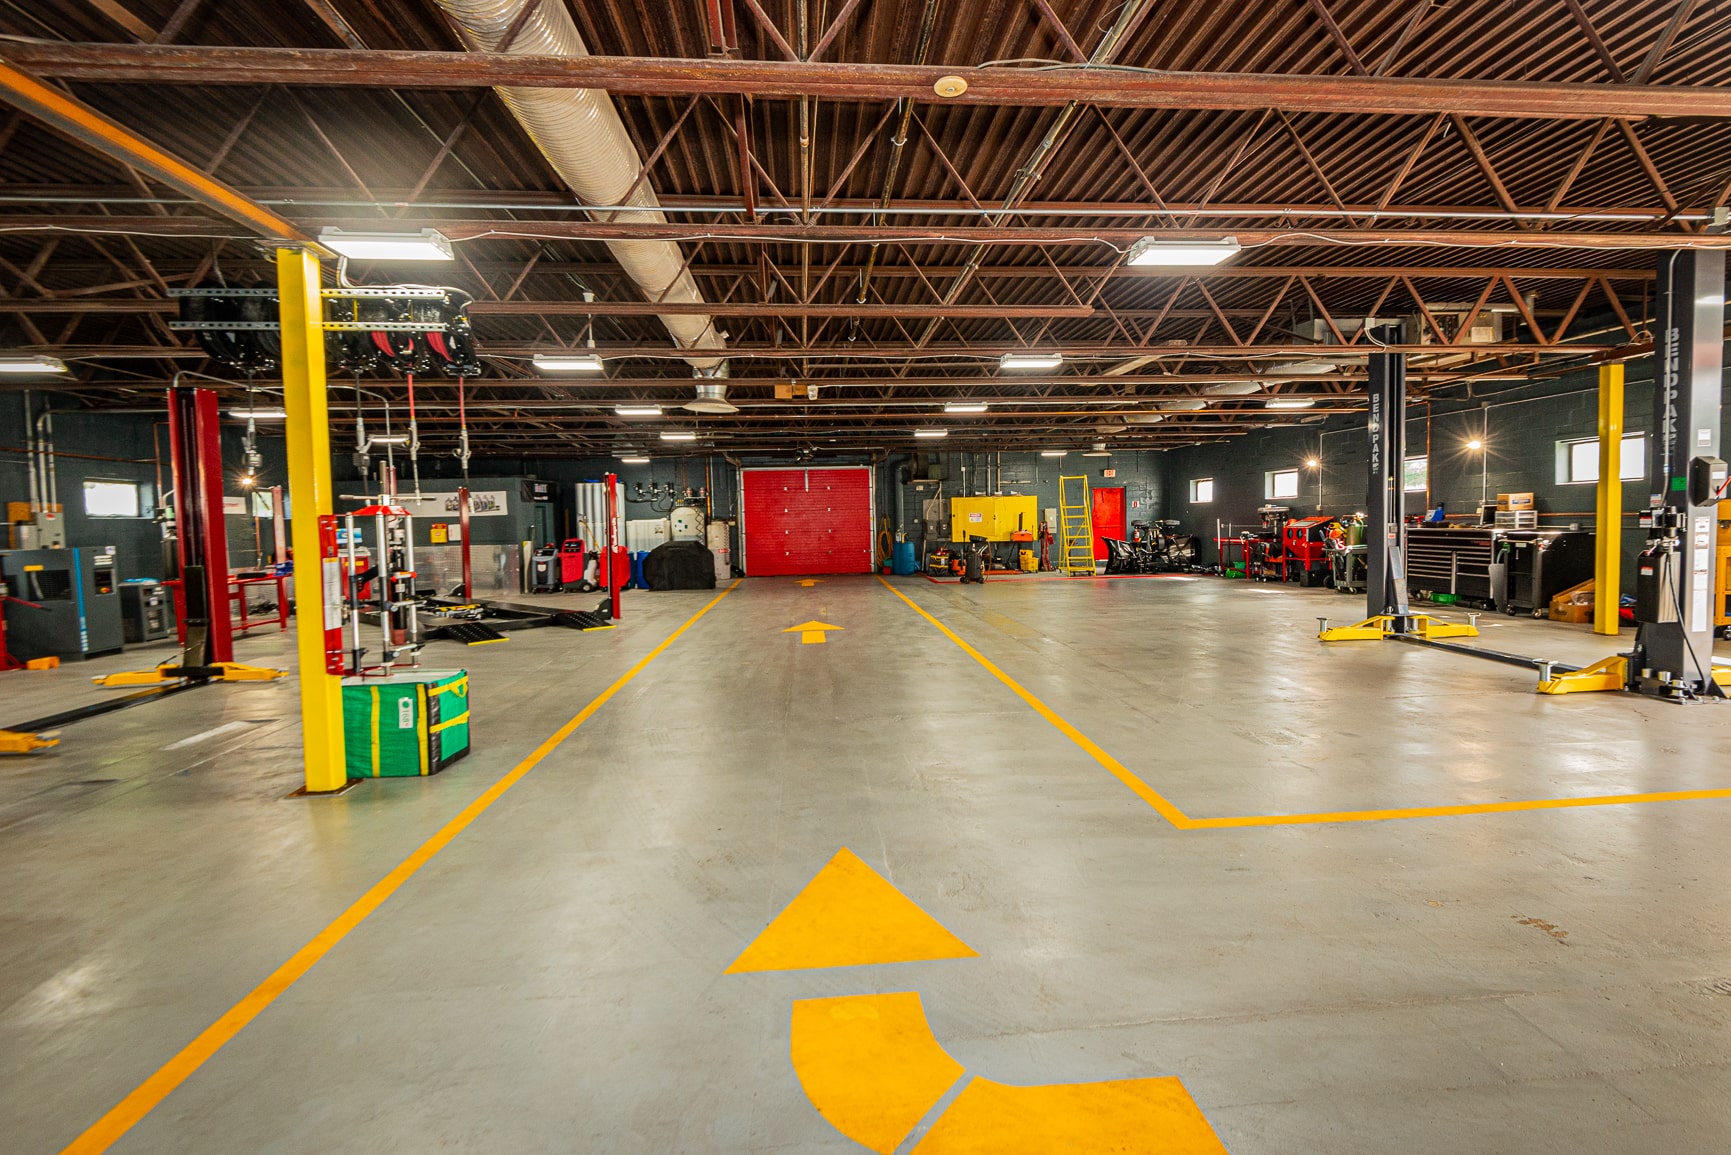 A large warehouse with yellow markings on the floor.